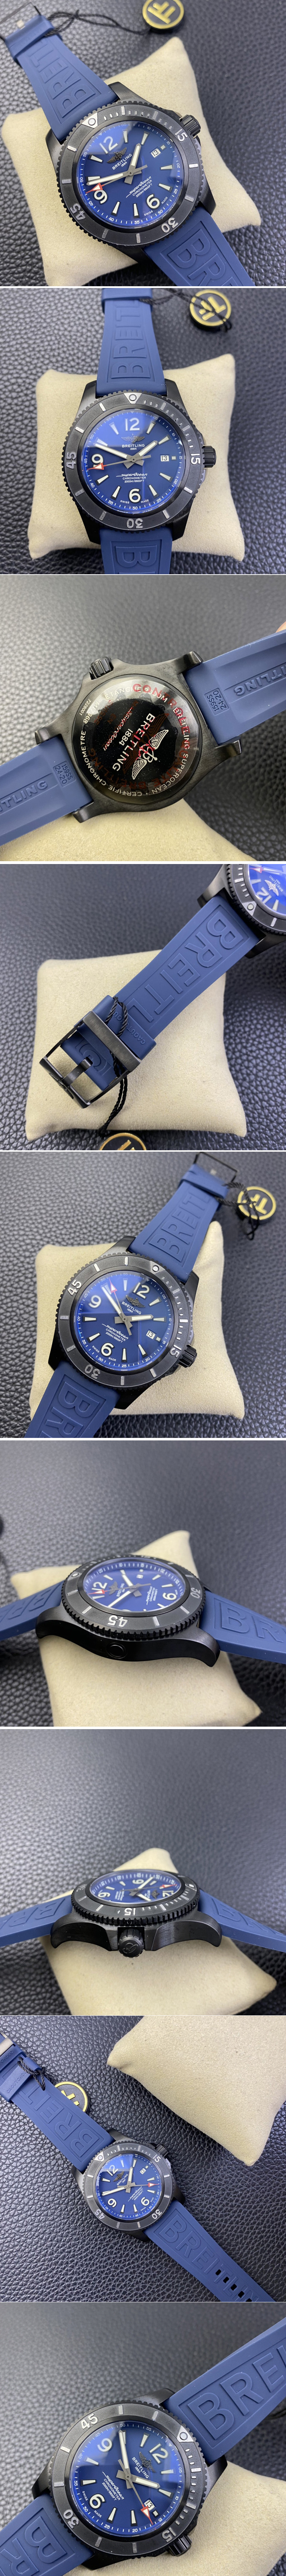 Replica Breitling Superocean Automatic 46mm TF 1:1 Best Edition PVD Titanium Blue Dial on Blue Rubber Strap A2824